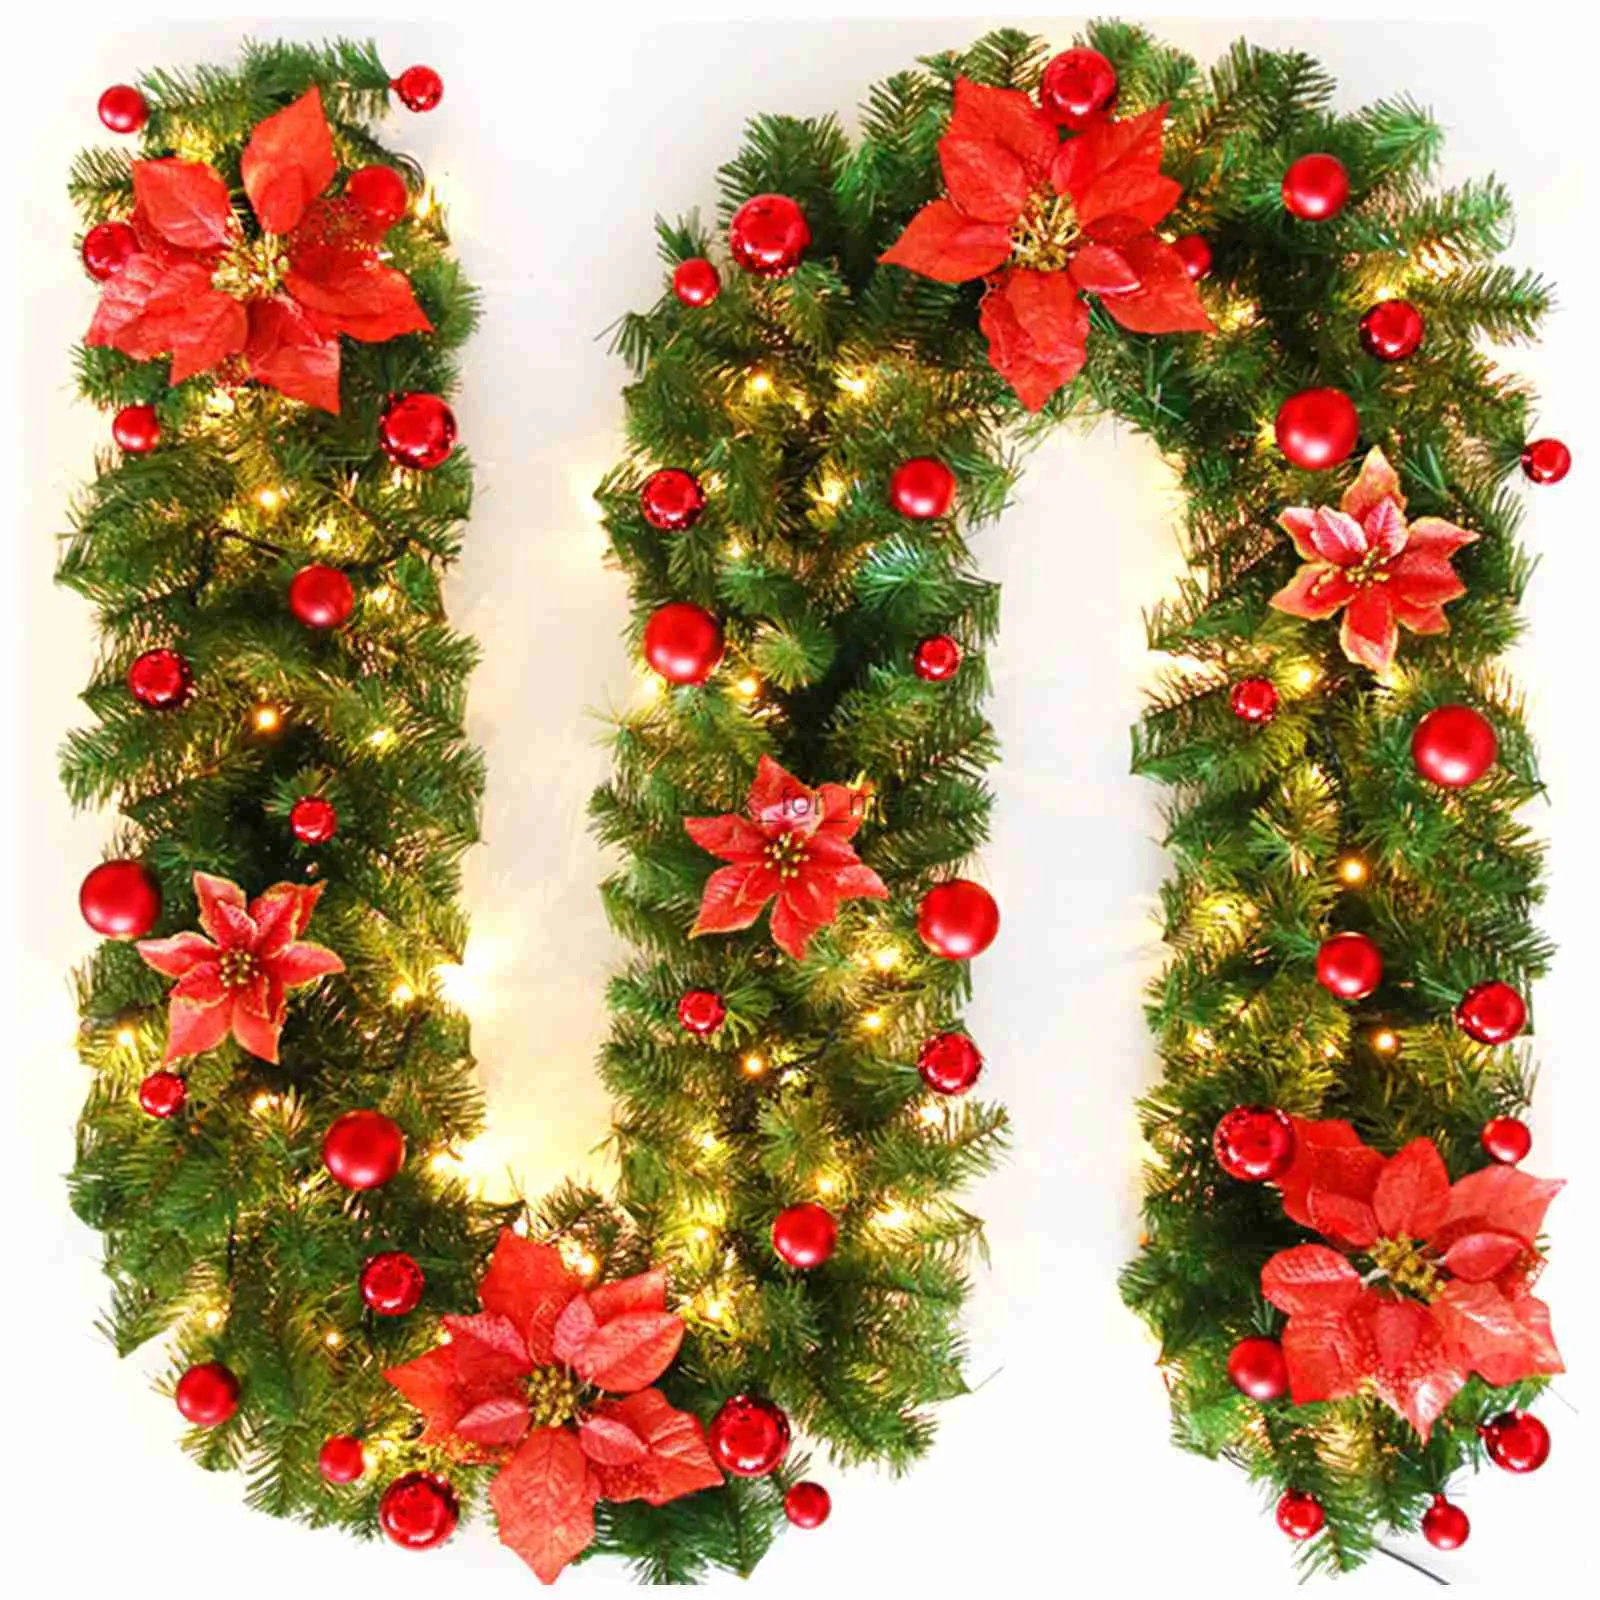 Christmas Decorations 2.7M LED Light Christmas Rattan Wreath Hanging Flower Ring Decorative Christmas Tree Ornament Garland Xmas Home Party HKD230921